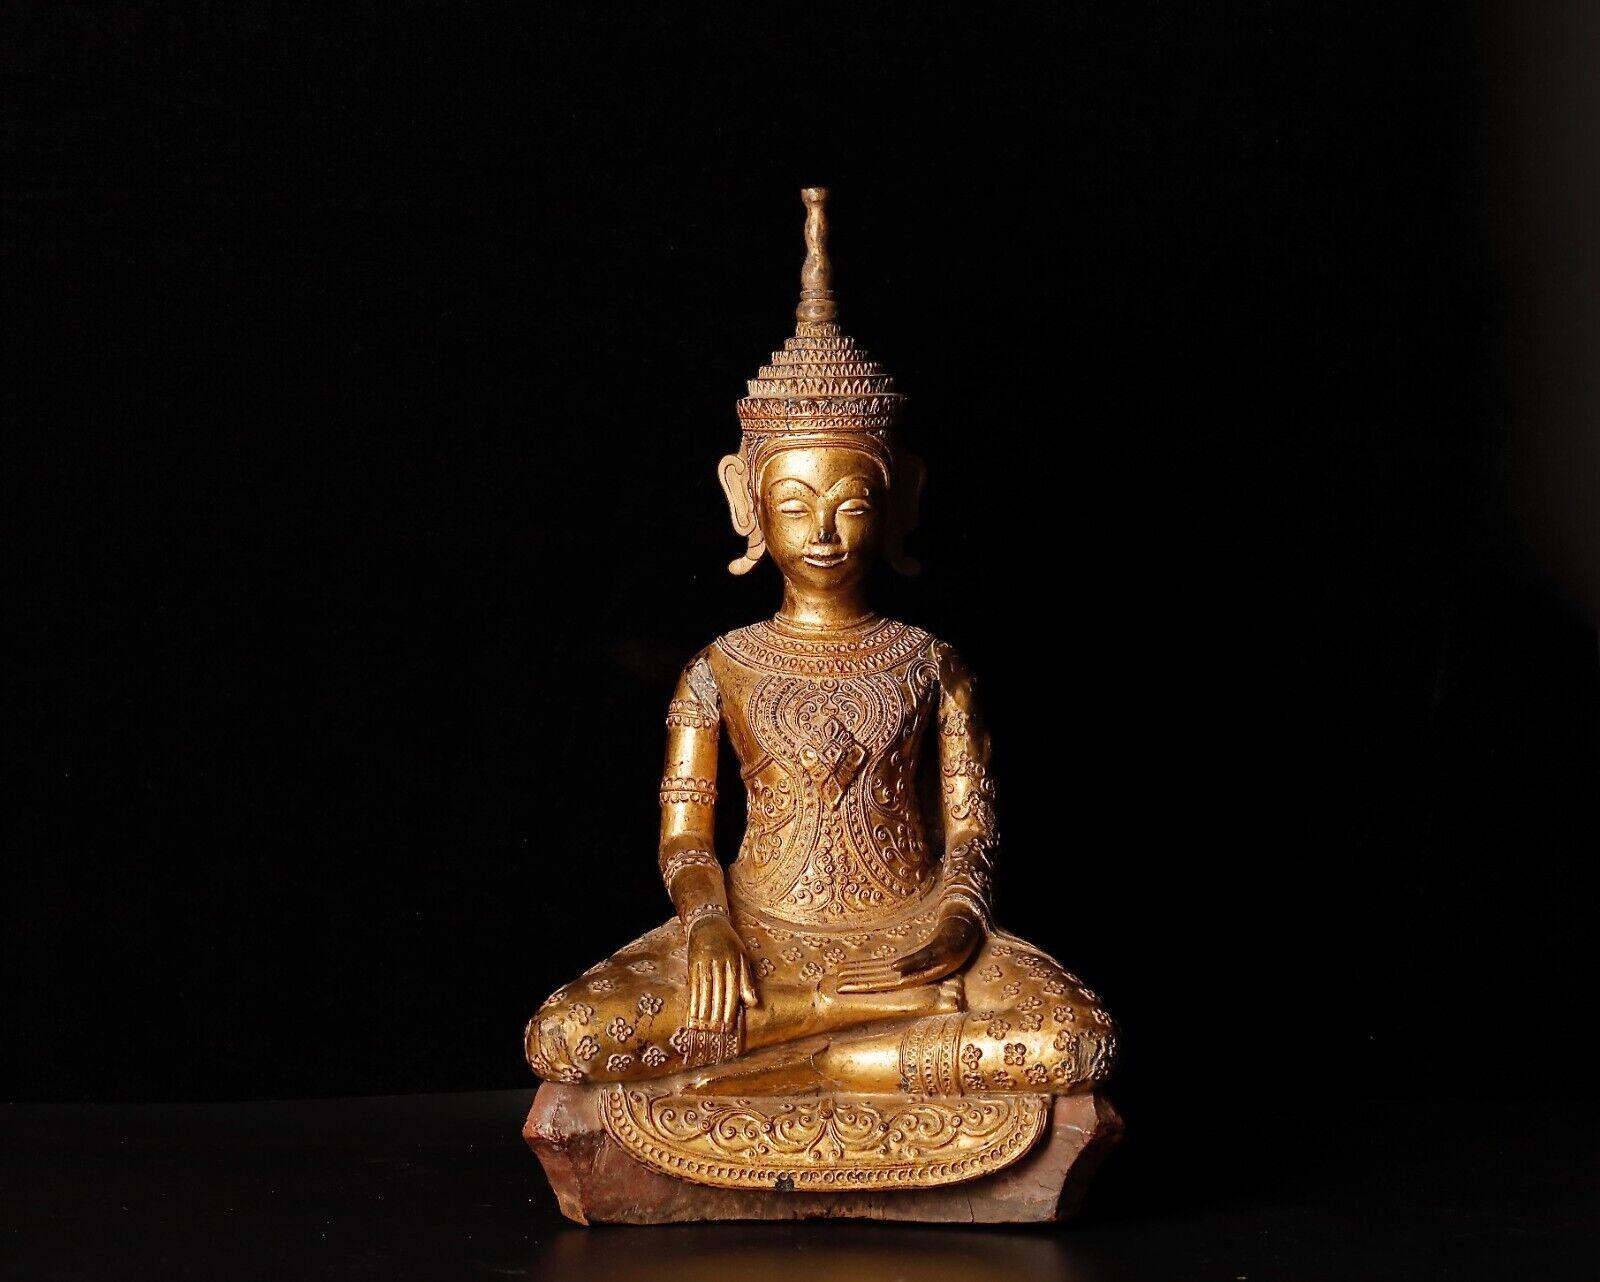 Presenting a remarkable wooden Buddhist sculpture hailing from Cambodia, characterized by its rarity and historical significance. This sculpture features gilded teak wood with exquisite lacquer applications, showcasing the fine craftsmanship and